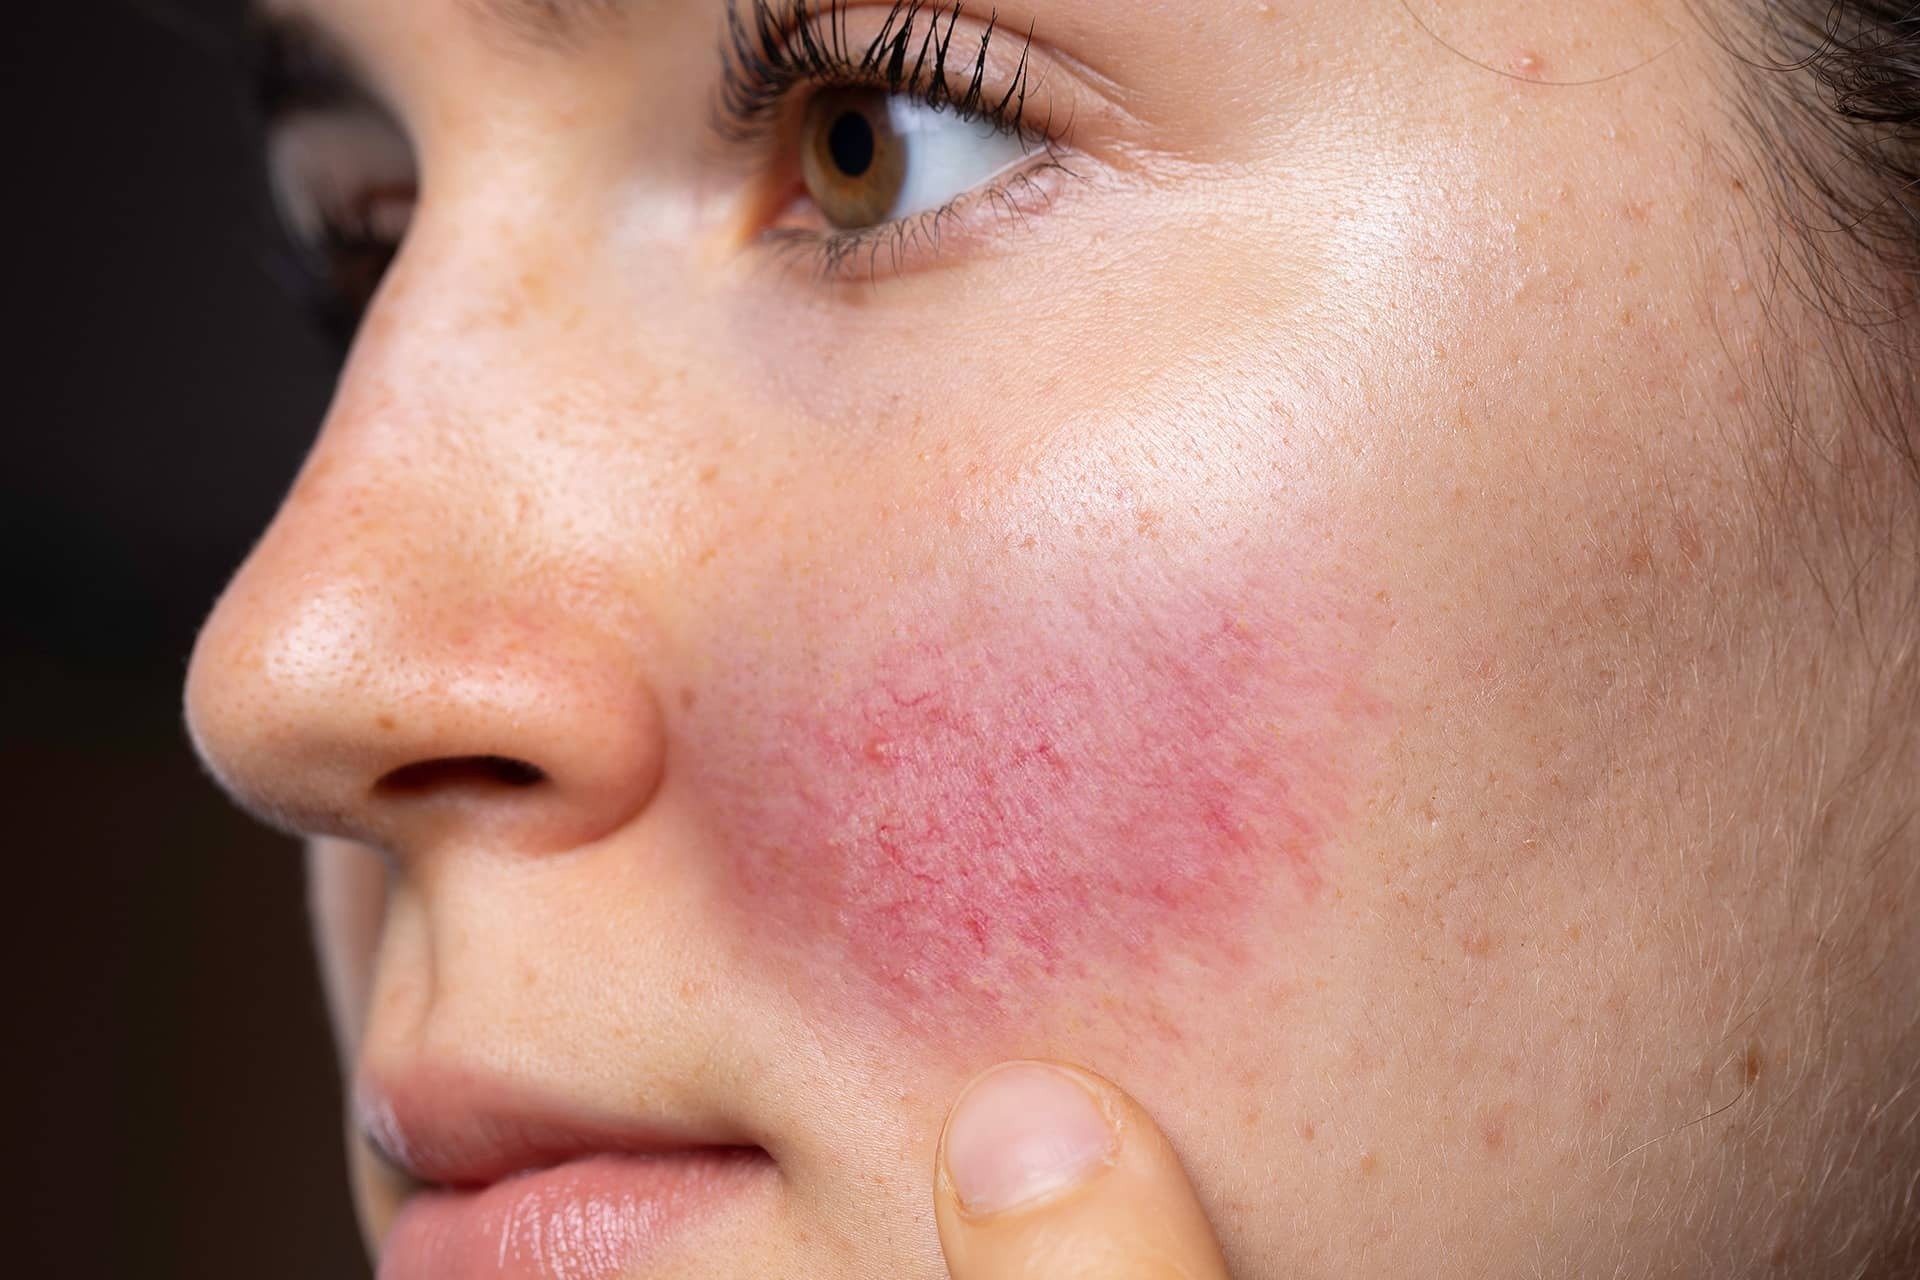 What Causes Redness On The Skin? - A Comprehensive Guide